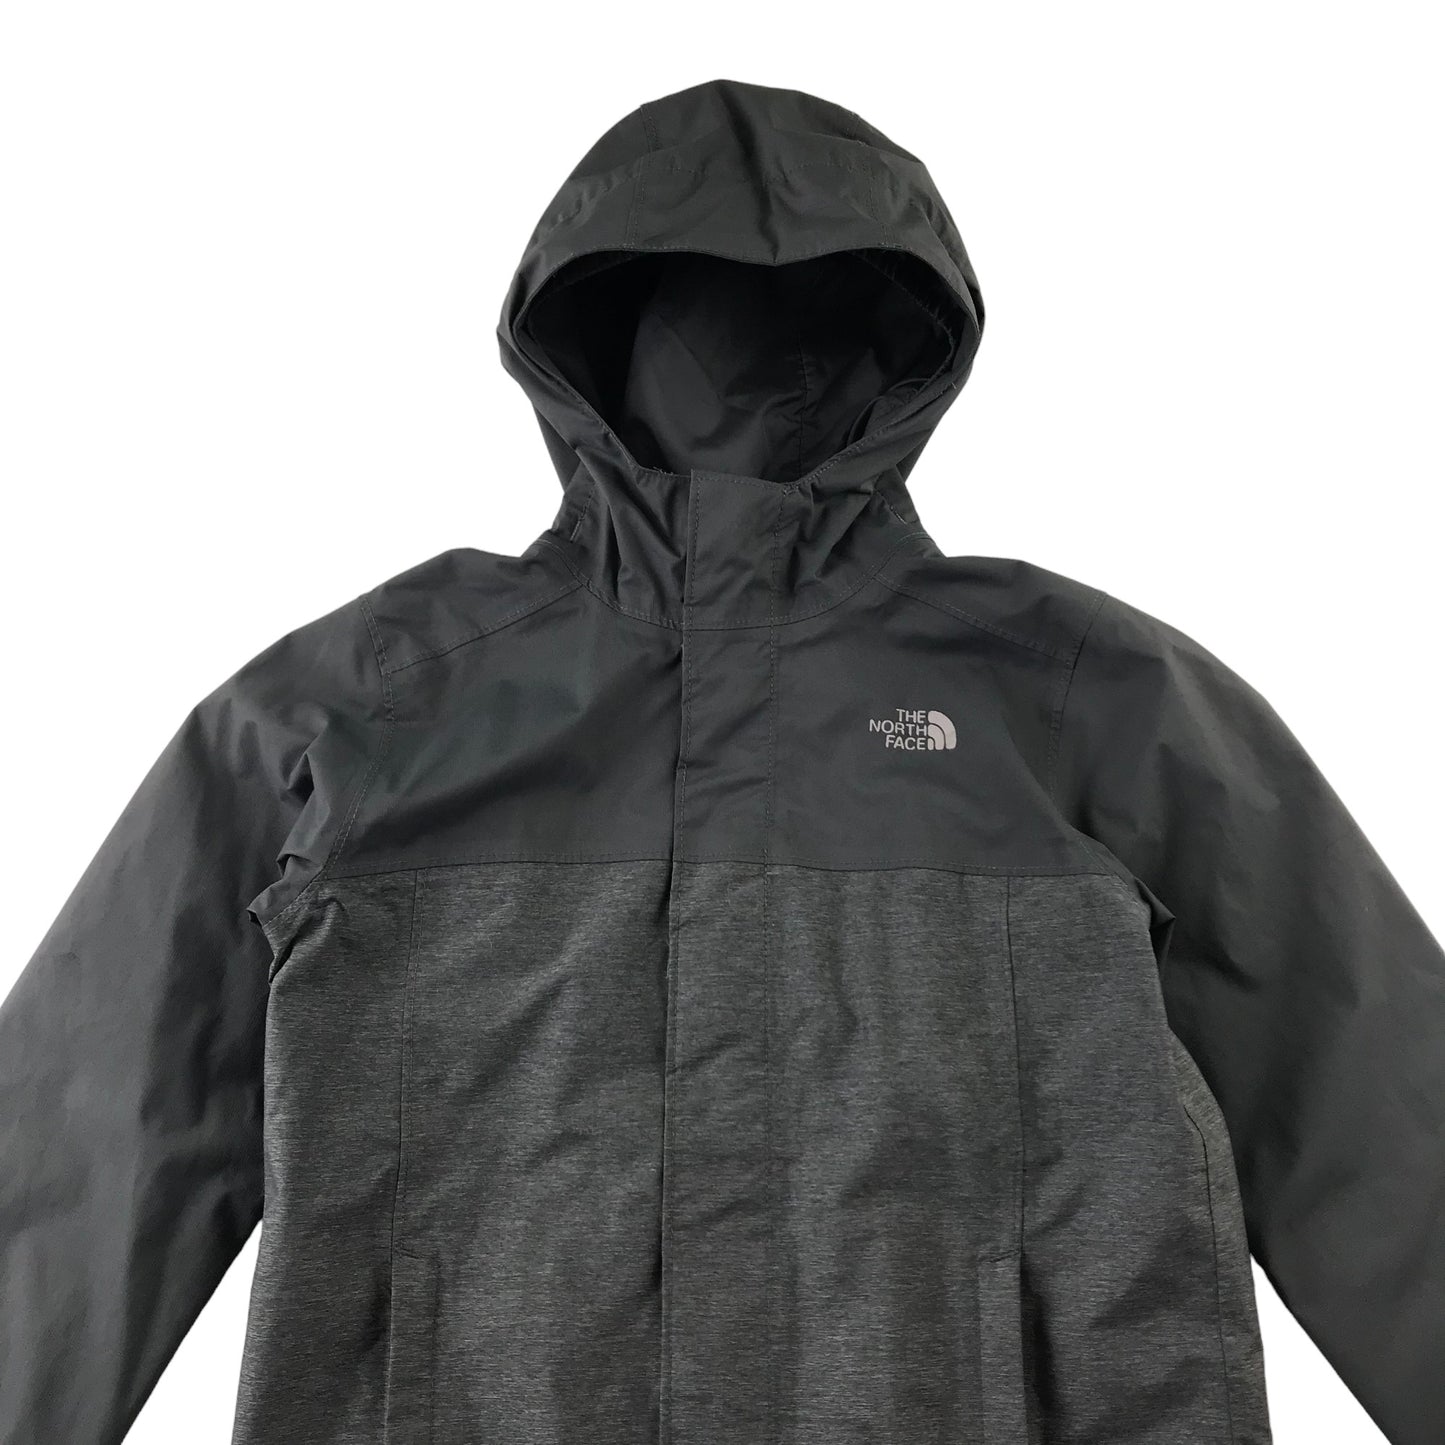 The North Face light jacket 7-8 years grey panelled with logo